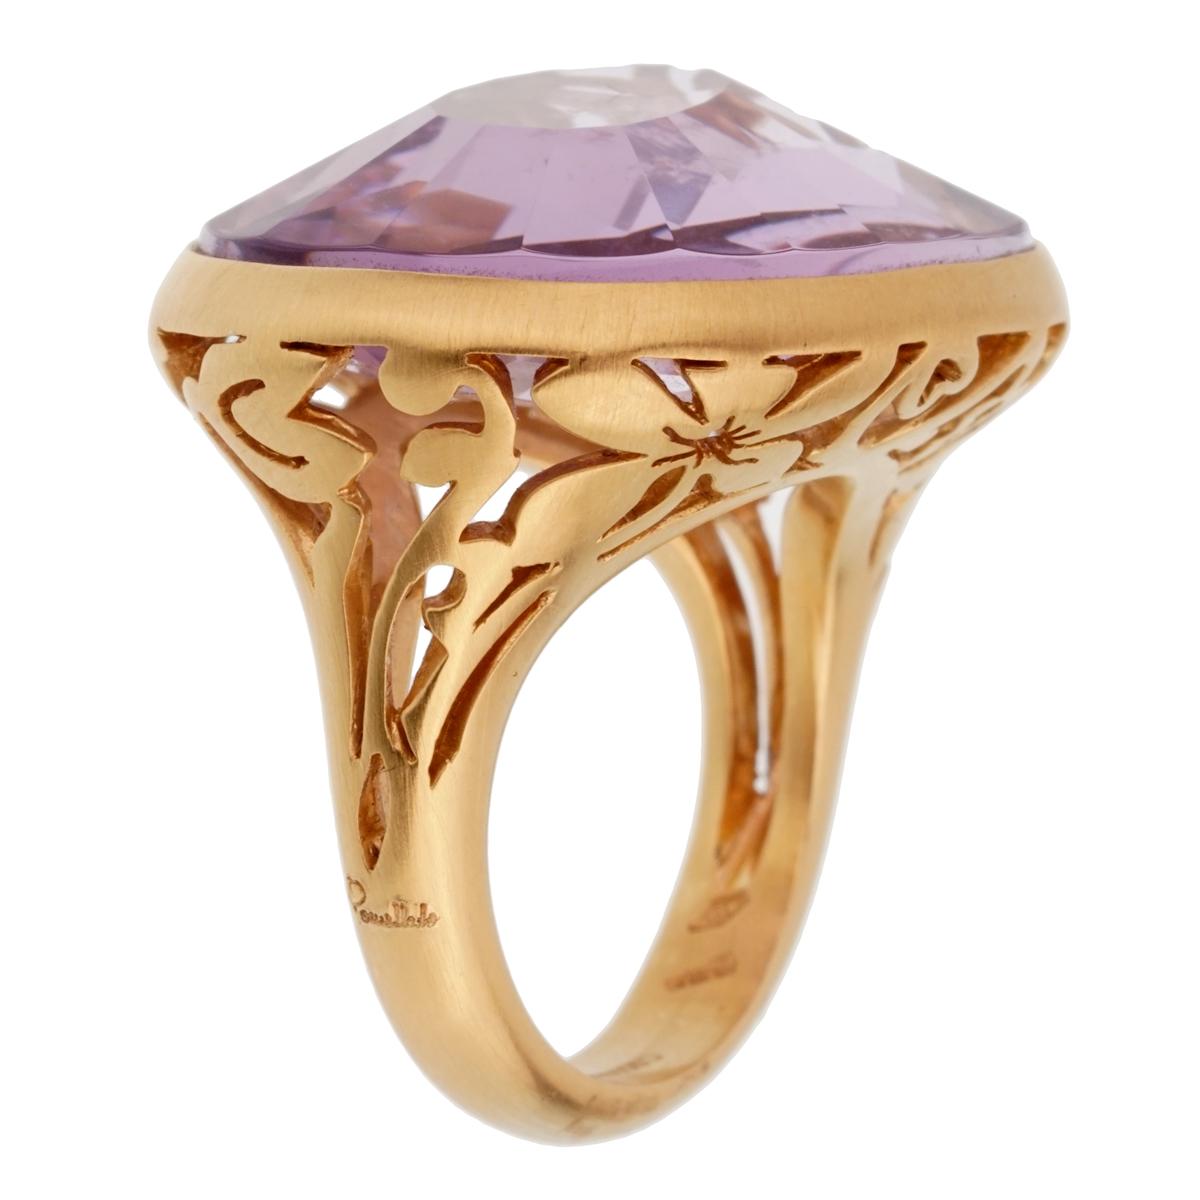 A chic brand new Pomellato cocktail ring showcasing a 10.19ct Amethyst set in 18k rose gold. The ring measures a size 5.5 and can be resized

Pomellato Retail: $5500
Sku: 2307